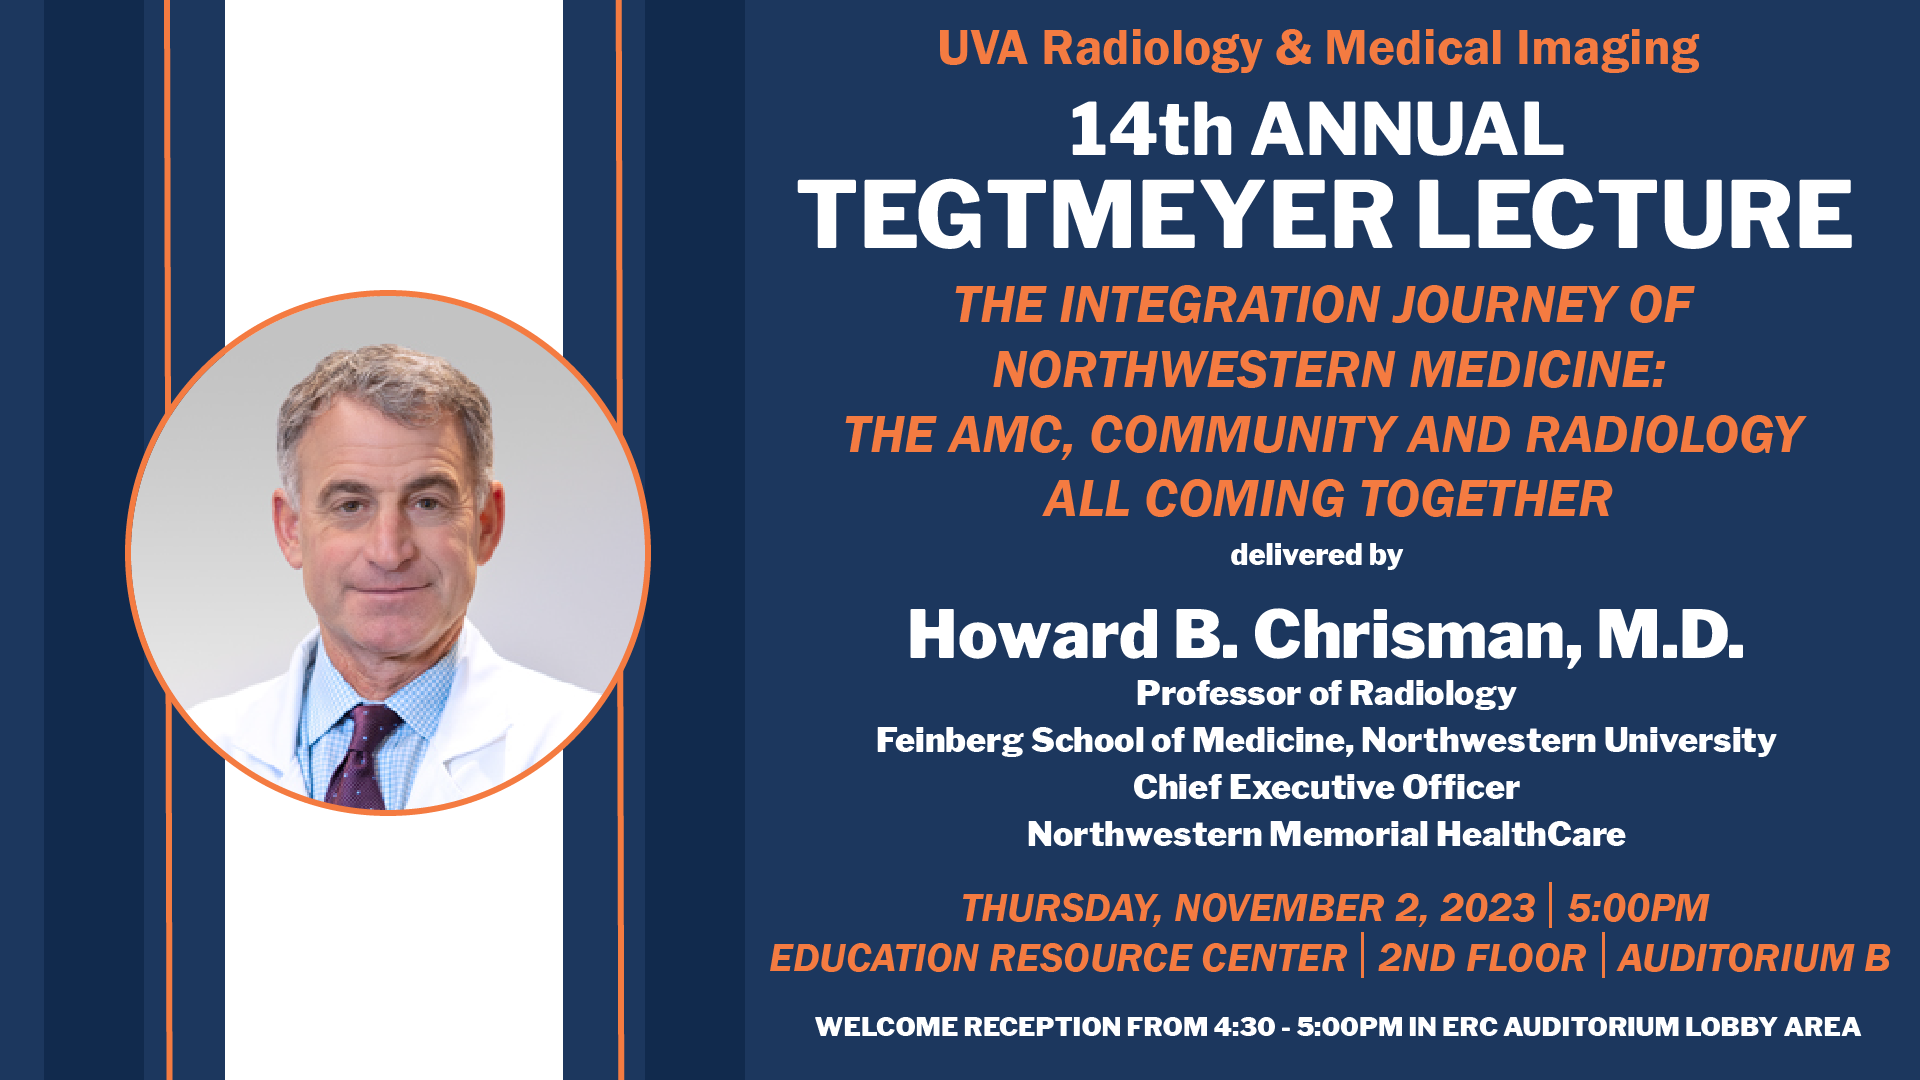 UVA Radiology & Medical Imaging presents the 14th Annual Tegtmeyer Lecture, titled: "The Integration Journey of Northwestern Medicine: The AMC, Community and Radiology All Coming Together" delivered by Howard B. Chrisman, MD, Professor of Radiology at the Feinberg School of Medicine, Northwestern University, and Chief Executive Officer of Northwestern Memorial HealthCare. The lecture will be held on Thursday, November 2, 2023 at 5 p.m. in the Educational Resource Center on the 2nd Floor, Auditorium B. A welcome reception will be held from 4:30 to 5 p.m. in the ERC Auditorium lobby area.